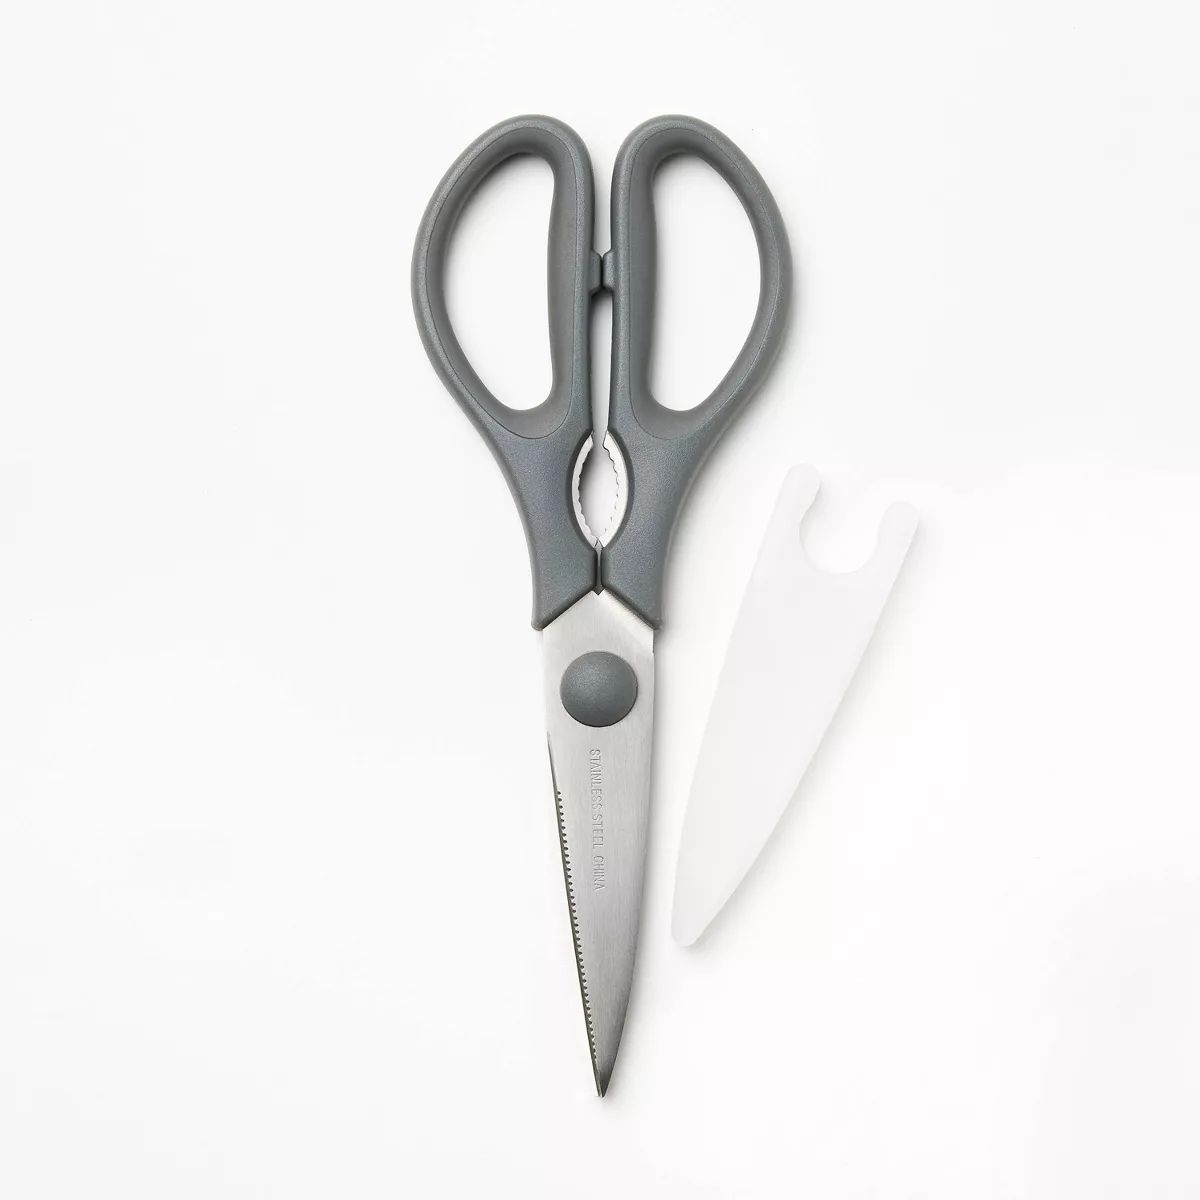 Stainless Steel Kitchen Shears with Soft Grip Dark Gray - Figmint™ | Target